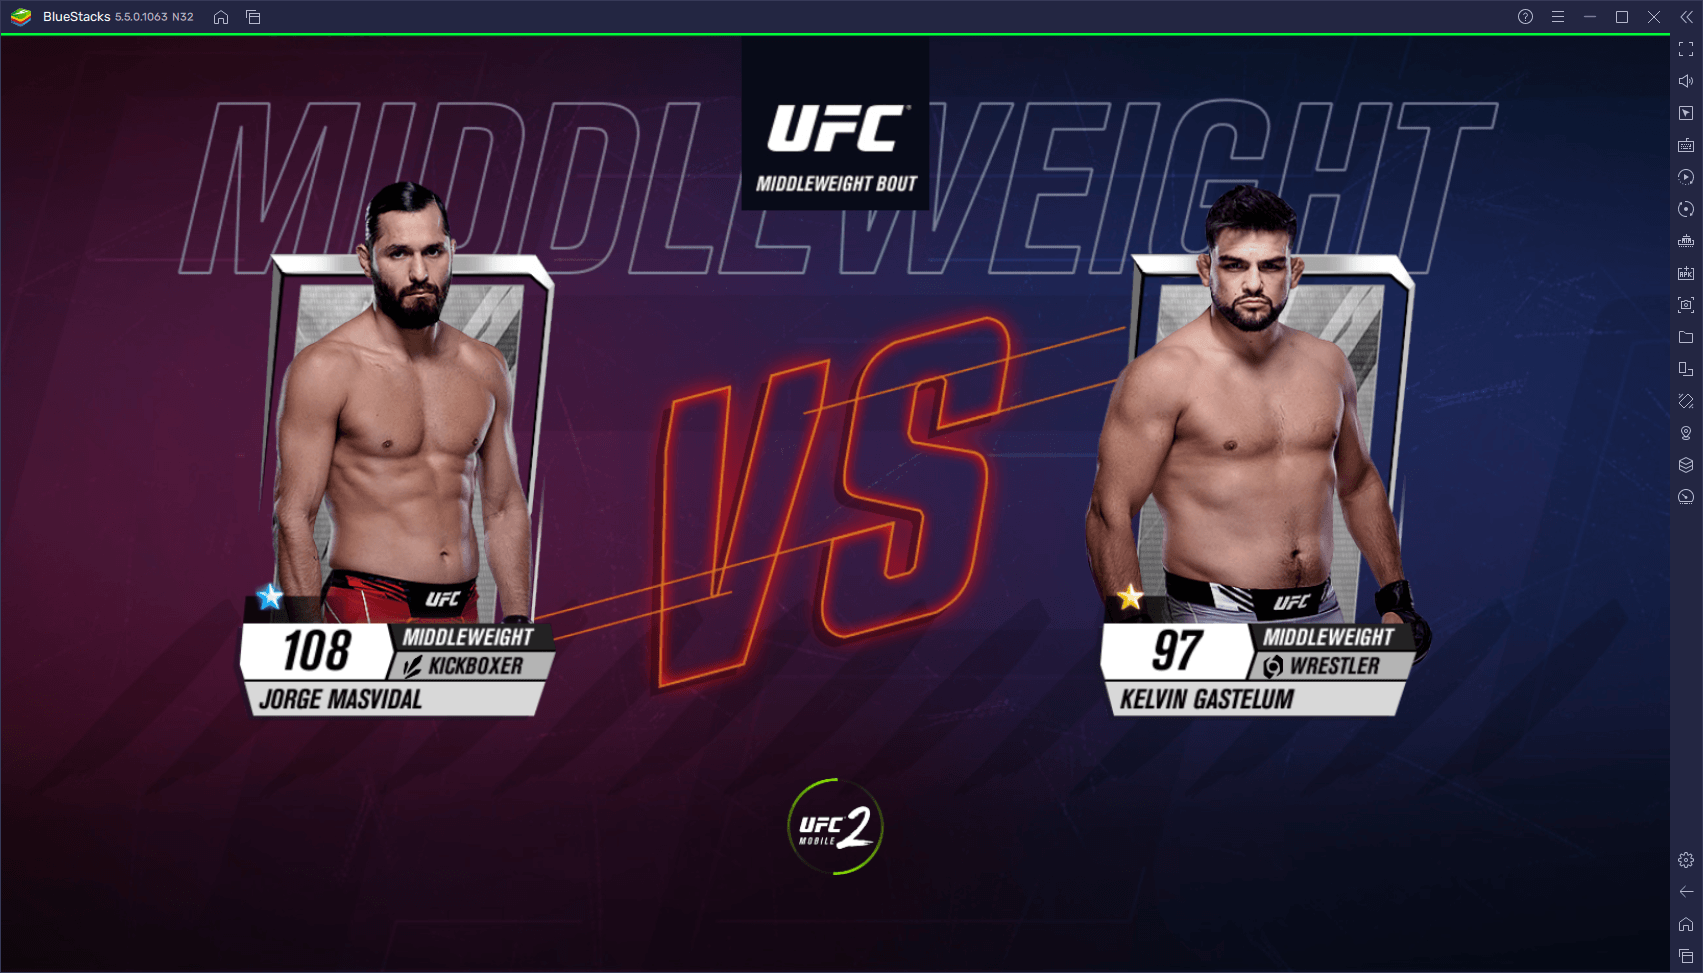 UFC Mobile 2 on PC - How to Configure BlueStacks to Get the Best Controls and Performance